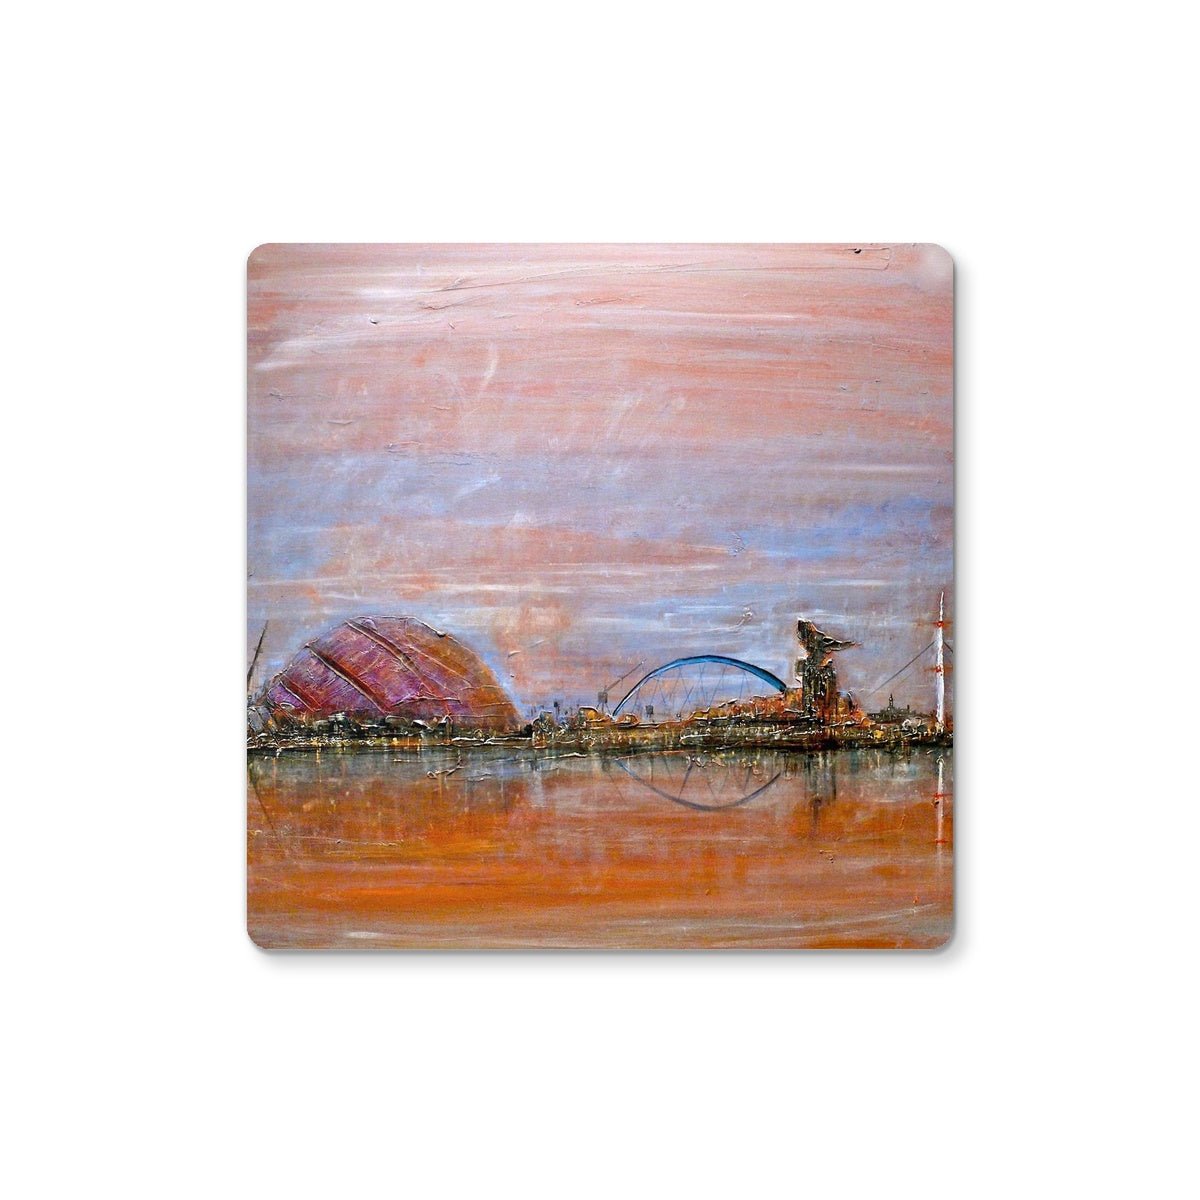 Glasgow Harbour Art Gifts Coaster-Coasters-Edinburgh & Glasgow Art Gallery-Single Coaster-Paintings, Prints, Homeware, Art Gifts From Scotland By Scottish Artist Kevin Hunter